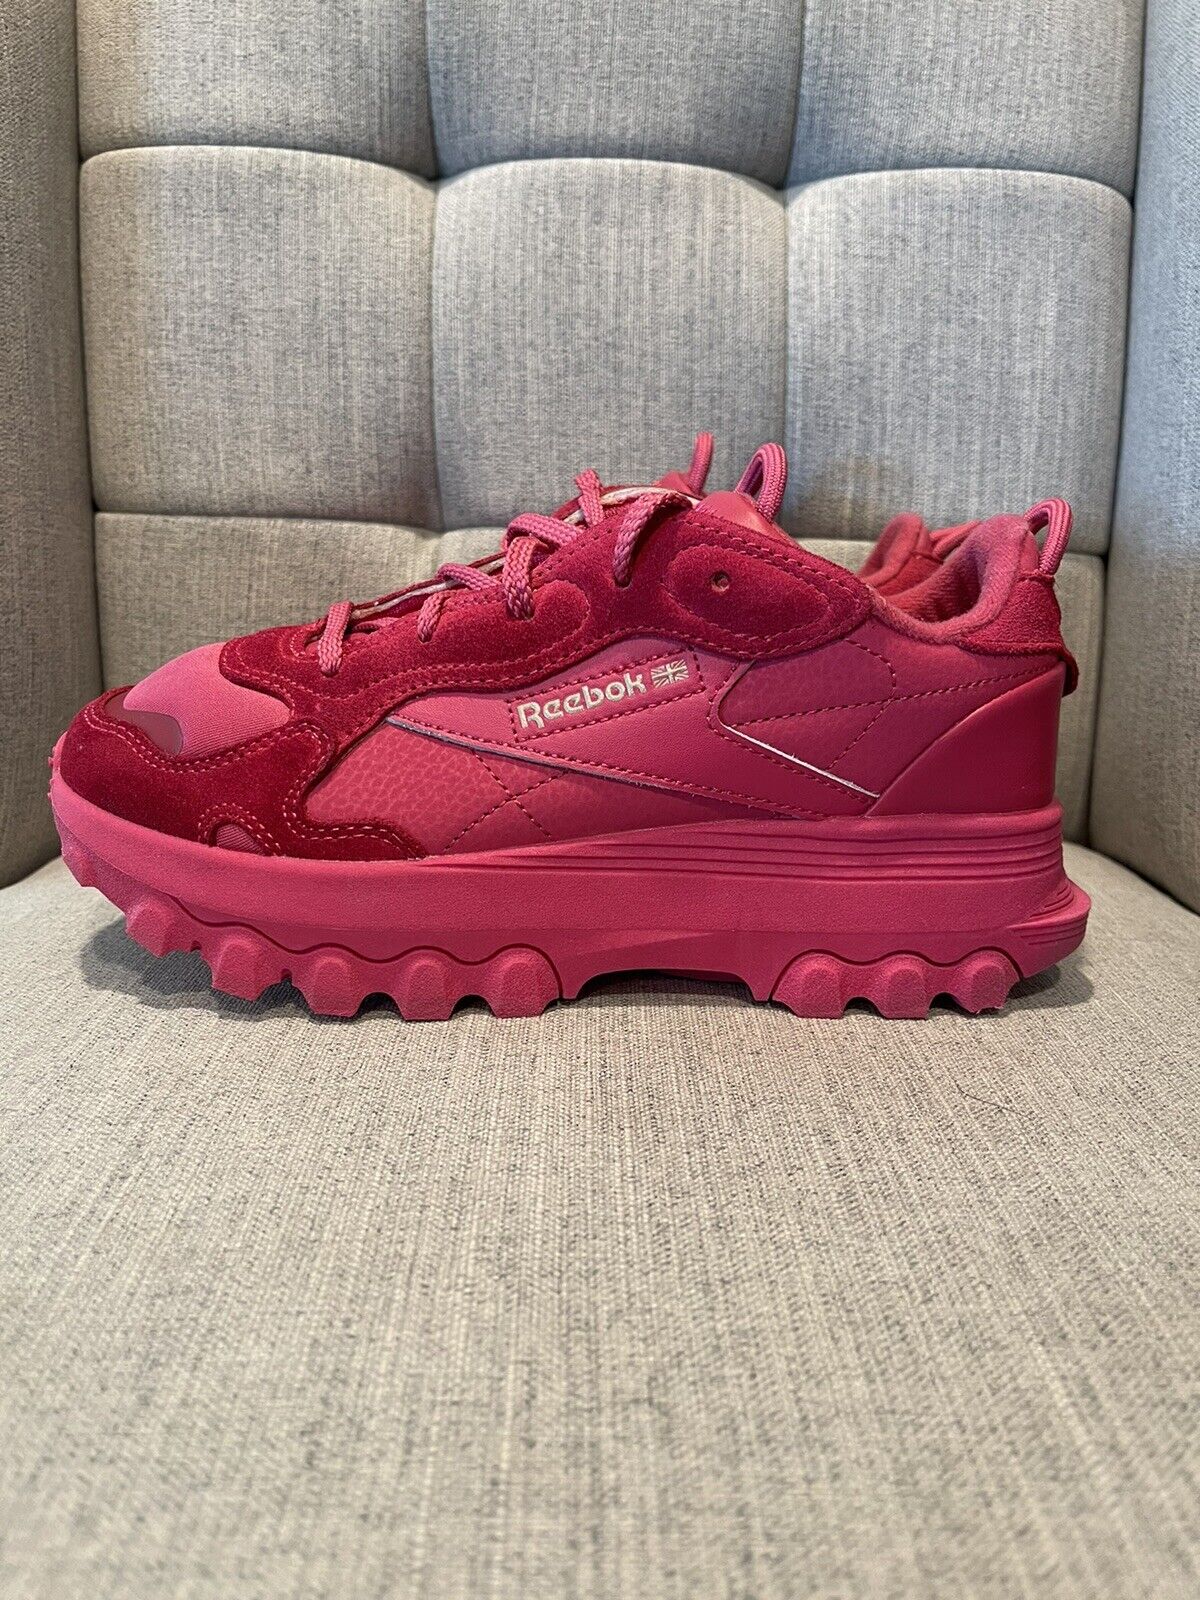 Pato martes Cayo Womens Reebok x Cardi B Classic Leather Club Astro Pink Limited Sneakers  Size 4 | eBay